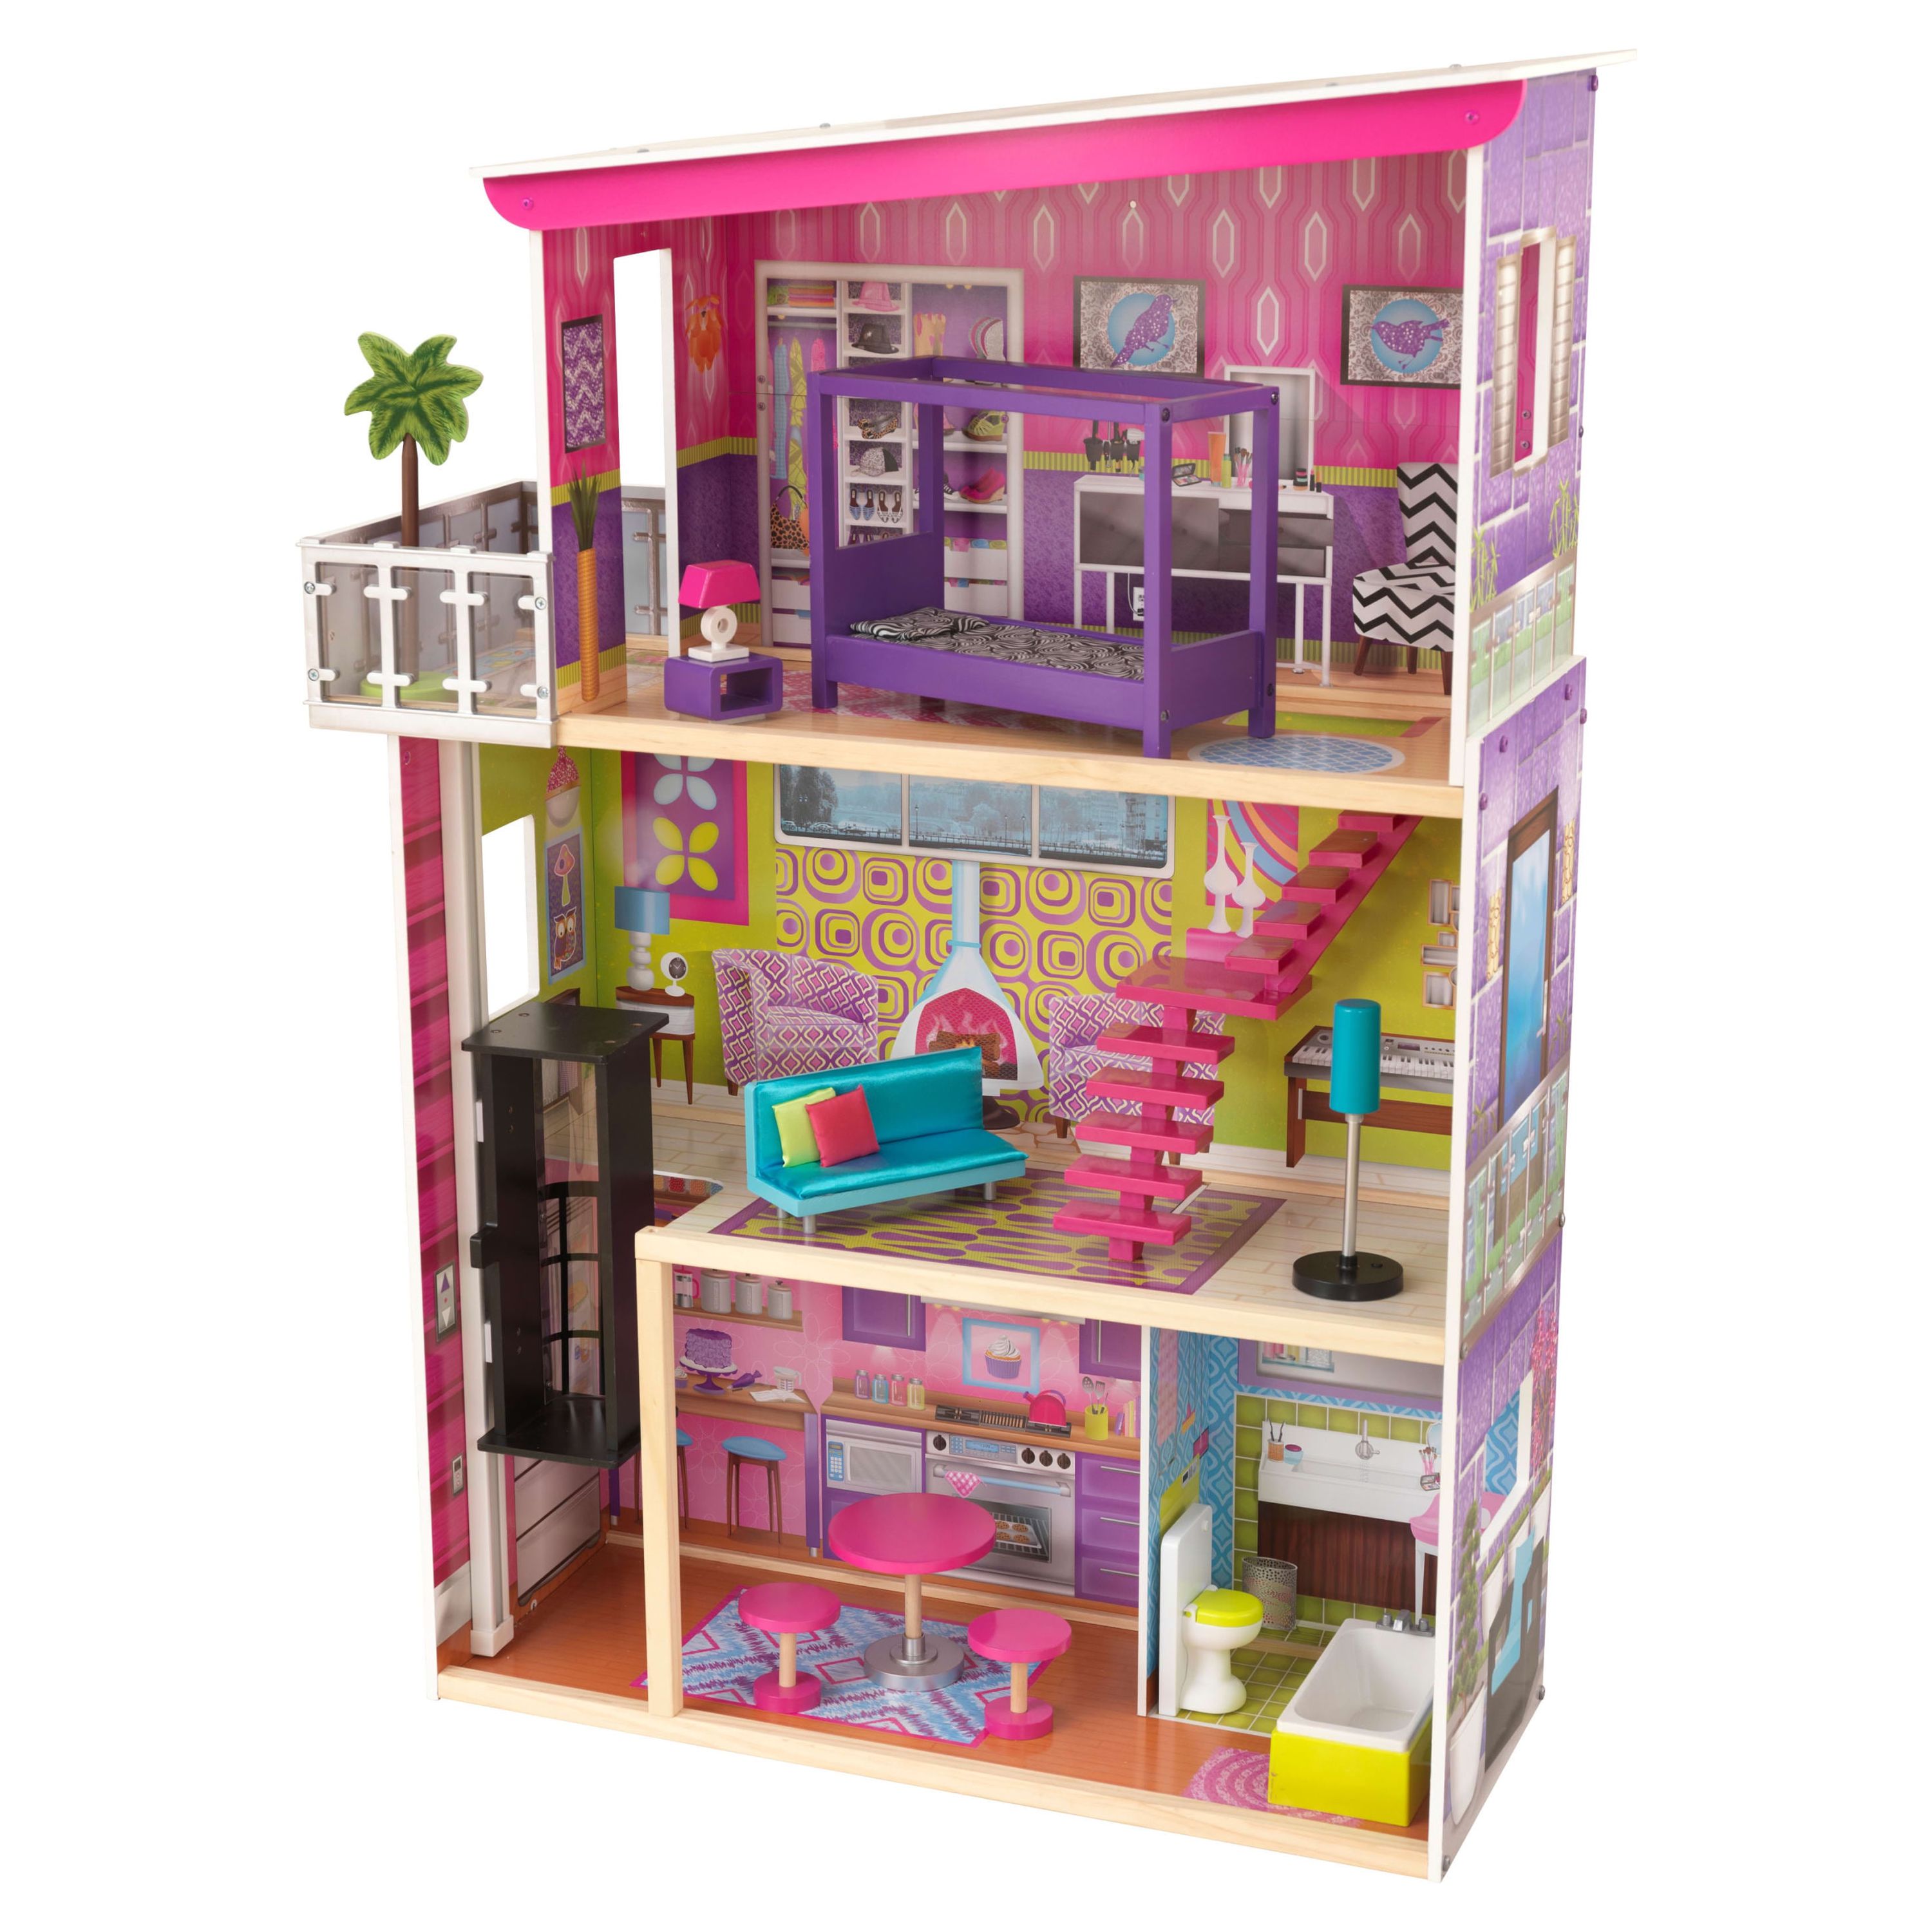 KidKraft Super Model Wooden Dollhouse with Elevator and 11 Accessories, Ages 3 and up - image 1 of 9